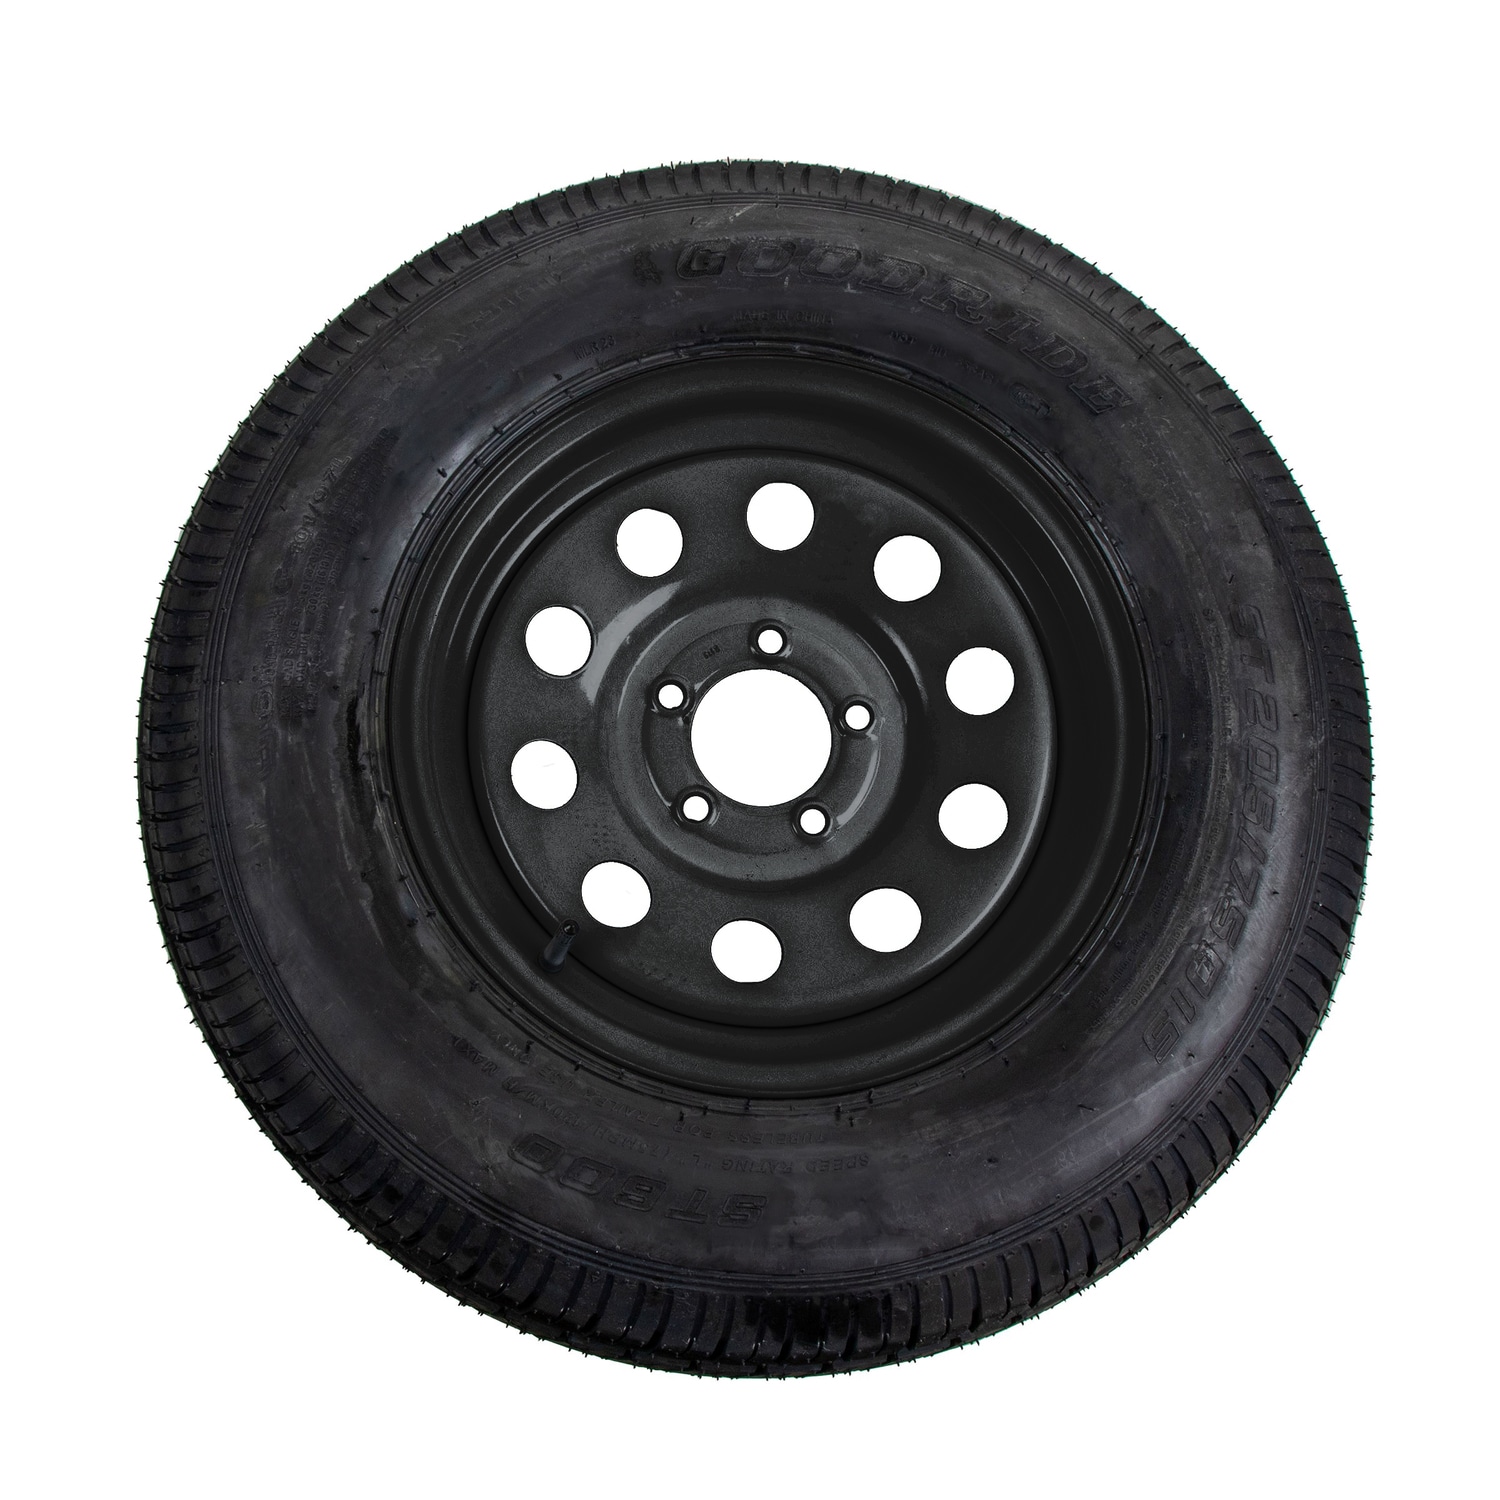 15 in ST205/75D15 Radial 6-Ply Trailer Tire and Black Mod Wheel 5 Lug on 4.5 in | - Carry-On Trailer 15BR-2